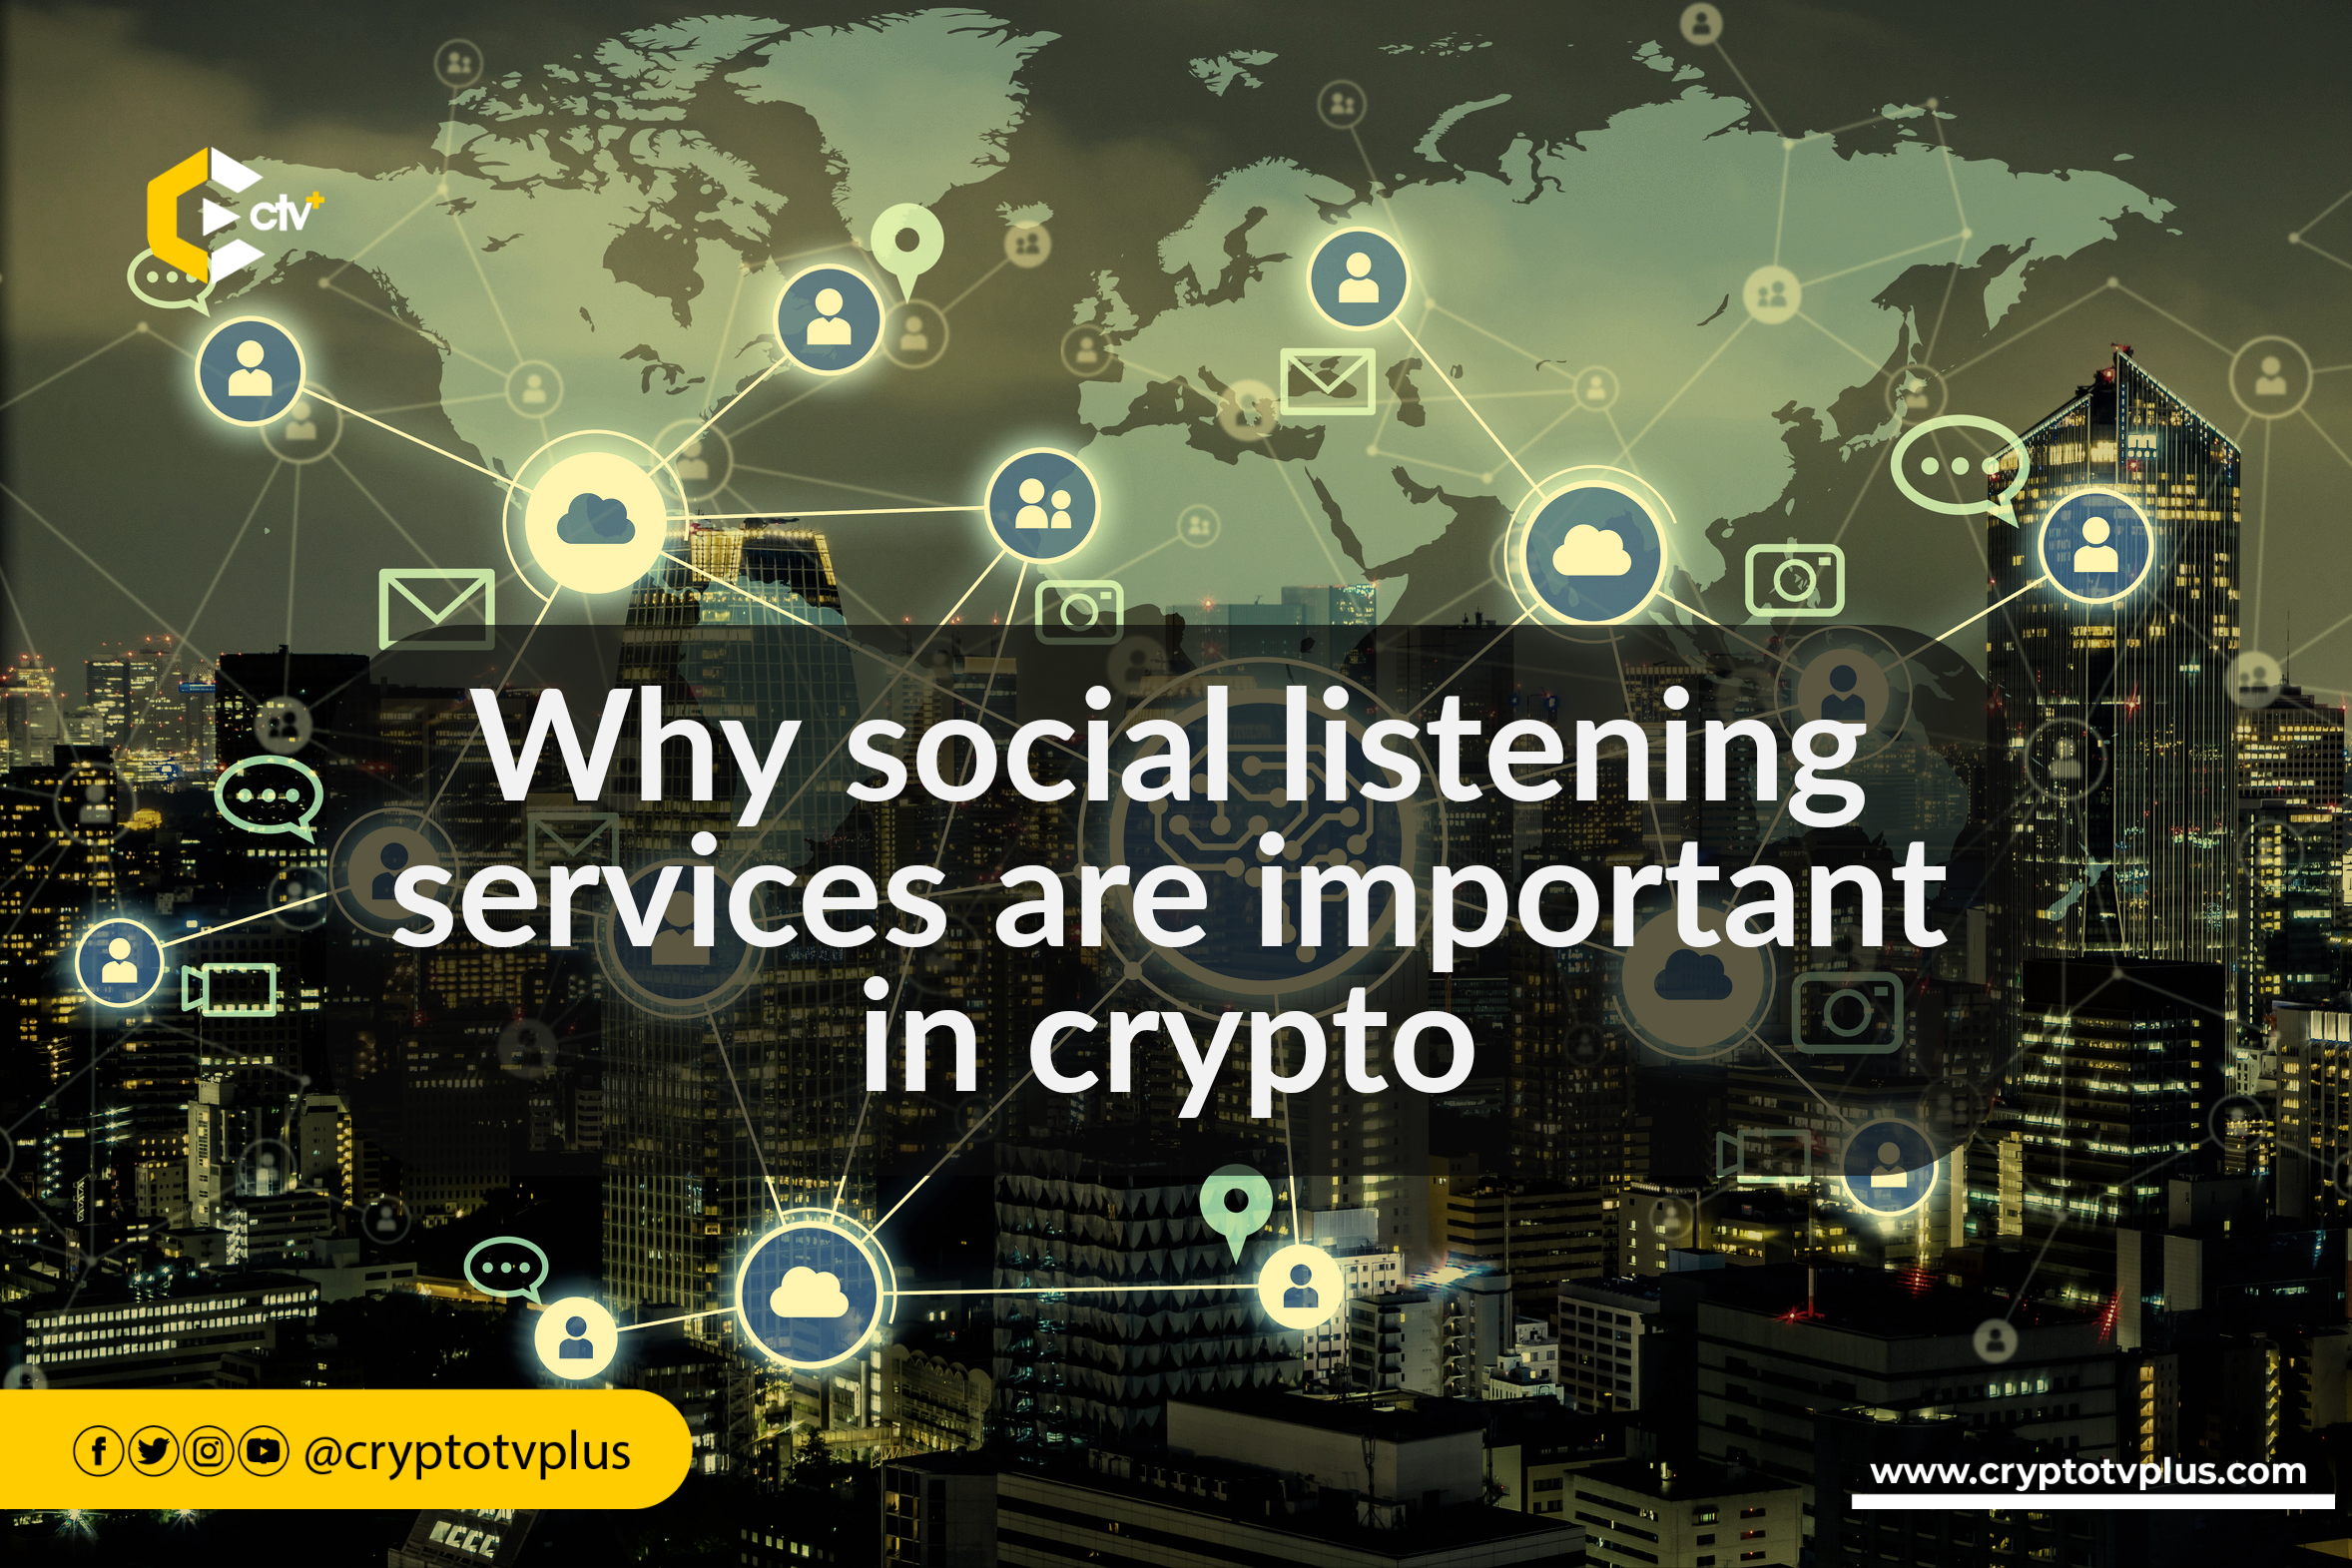 Crypto, market trends, Social listening services, Sentiment analysis tools, Real-time crypto insights